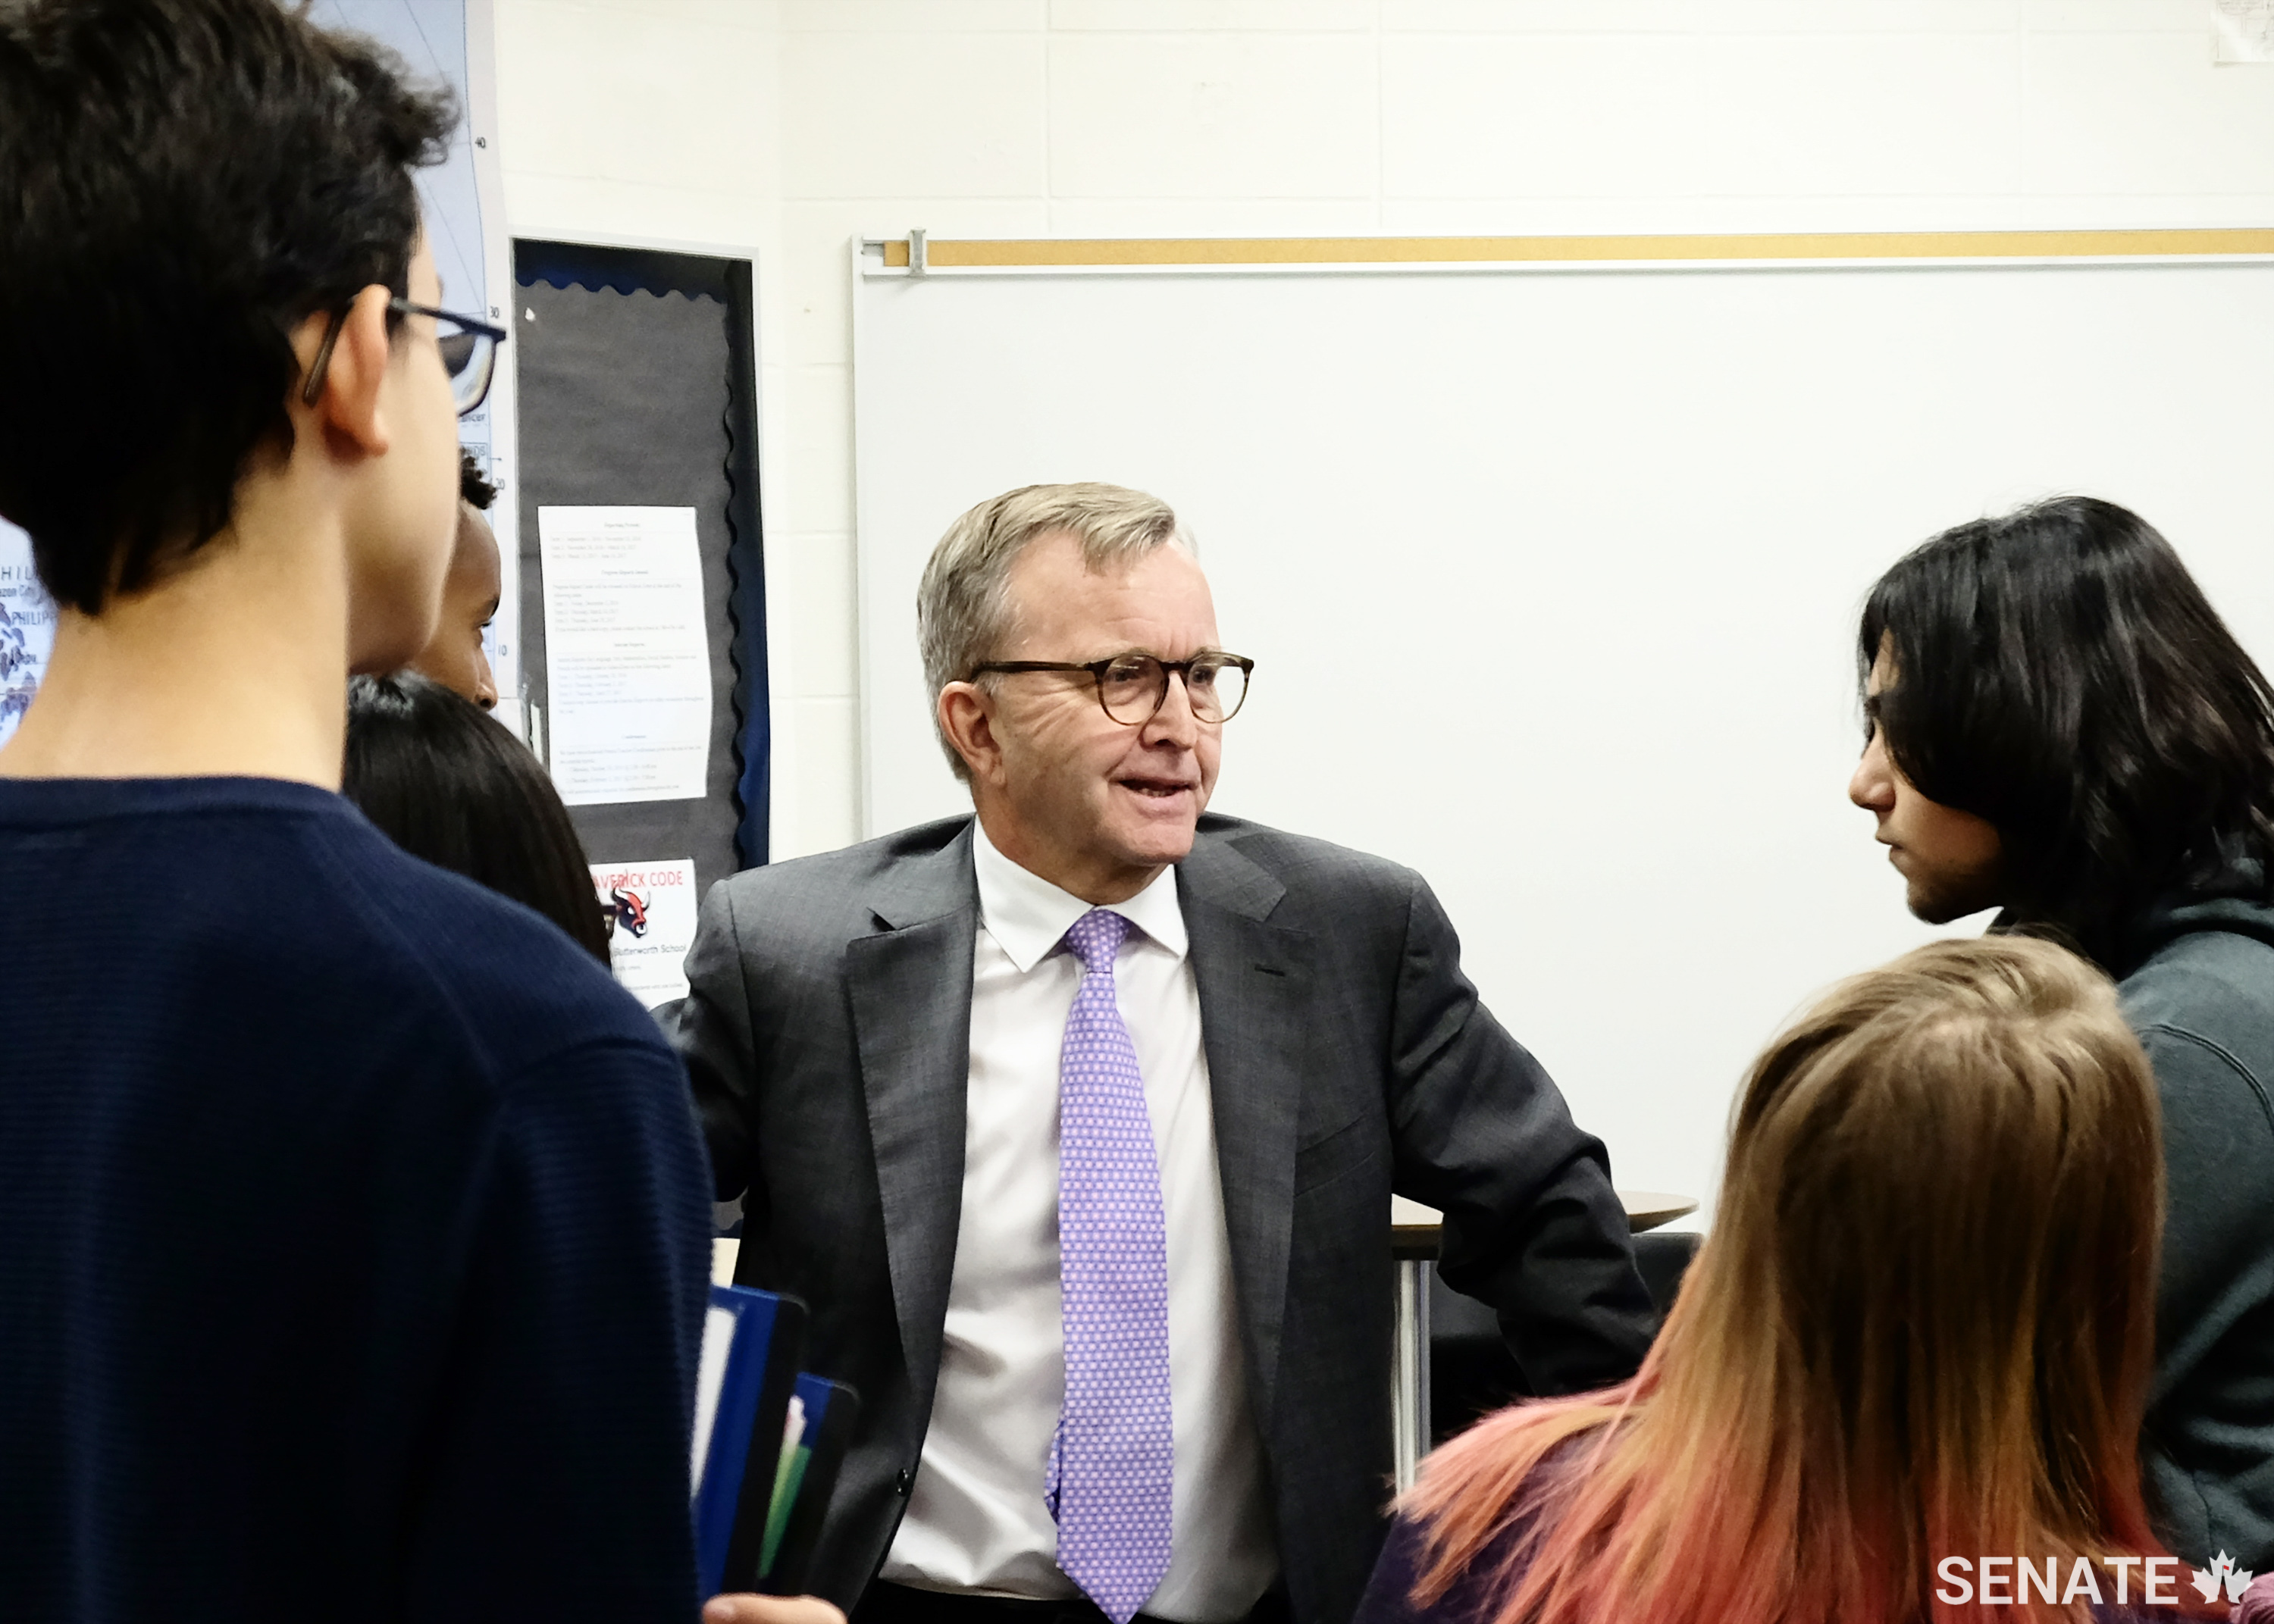 Senator Grant Mitchell talks about the Senate’s work with students in Edmonton during a SENgage event.